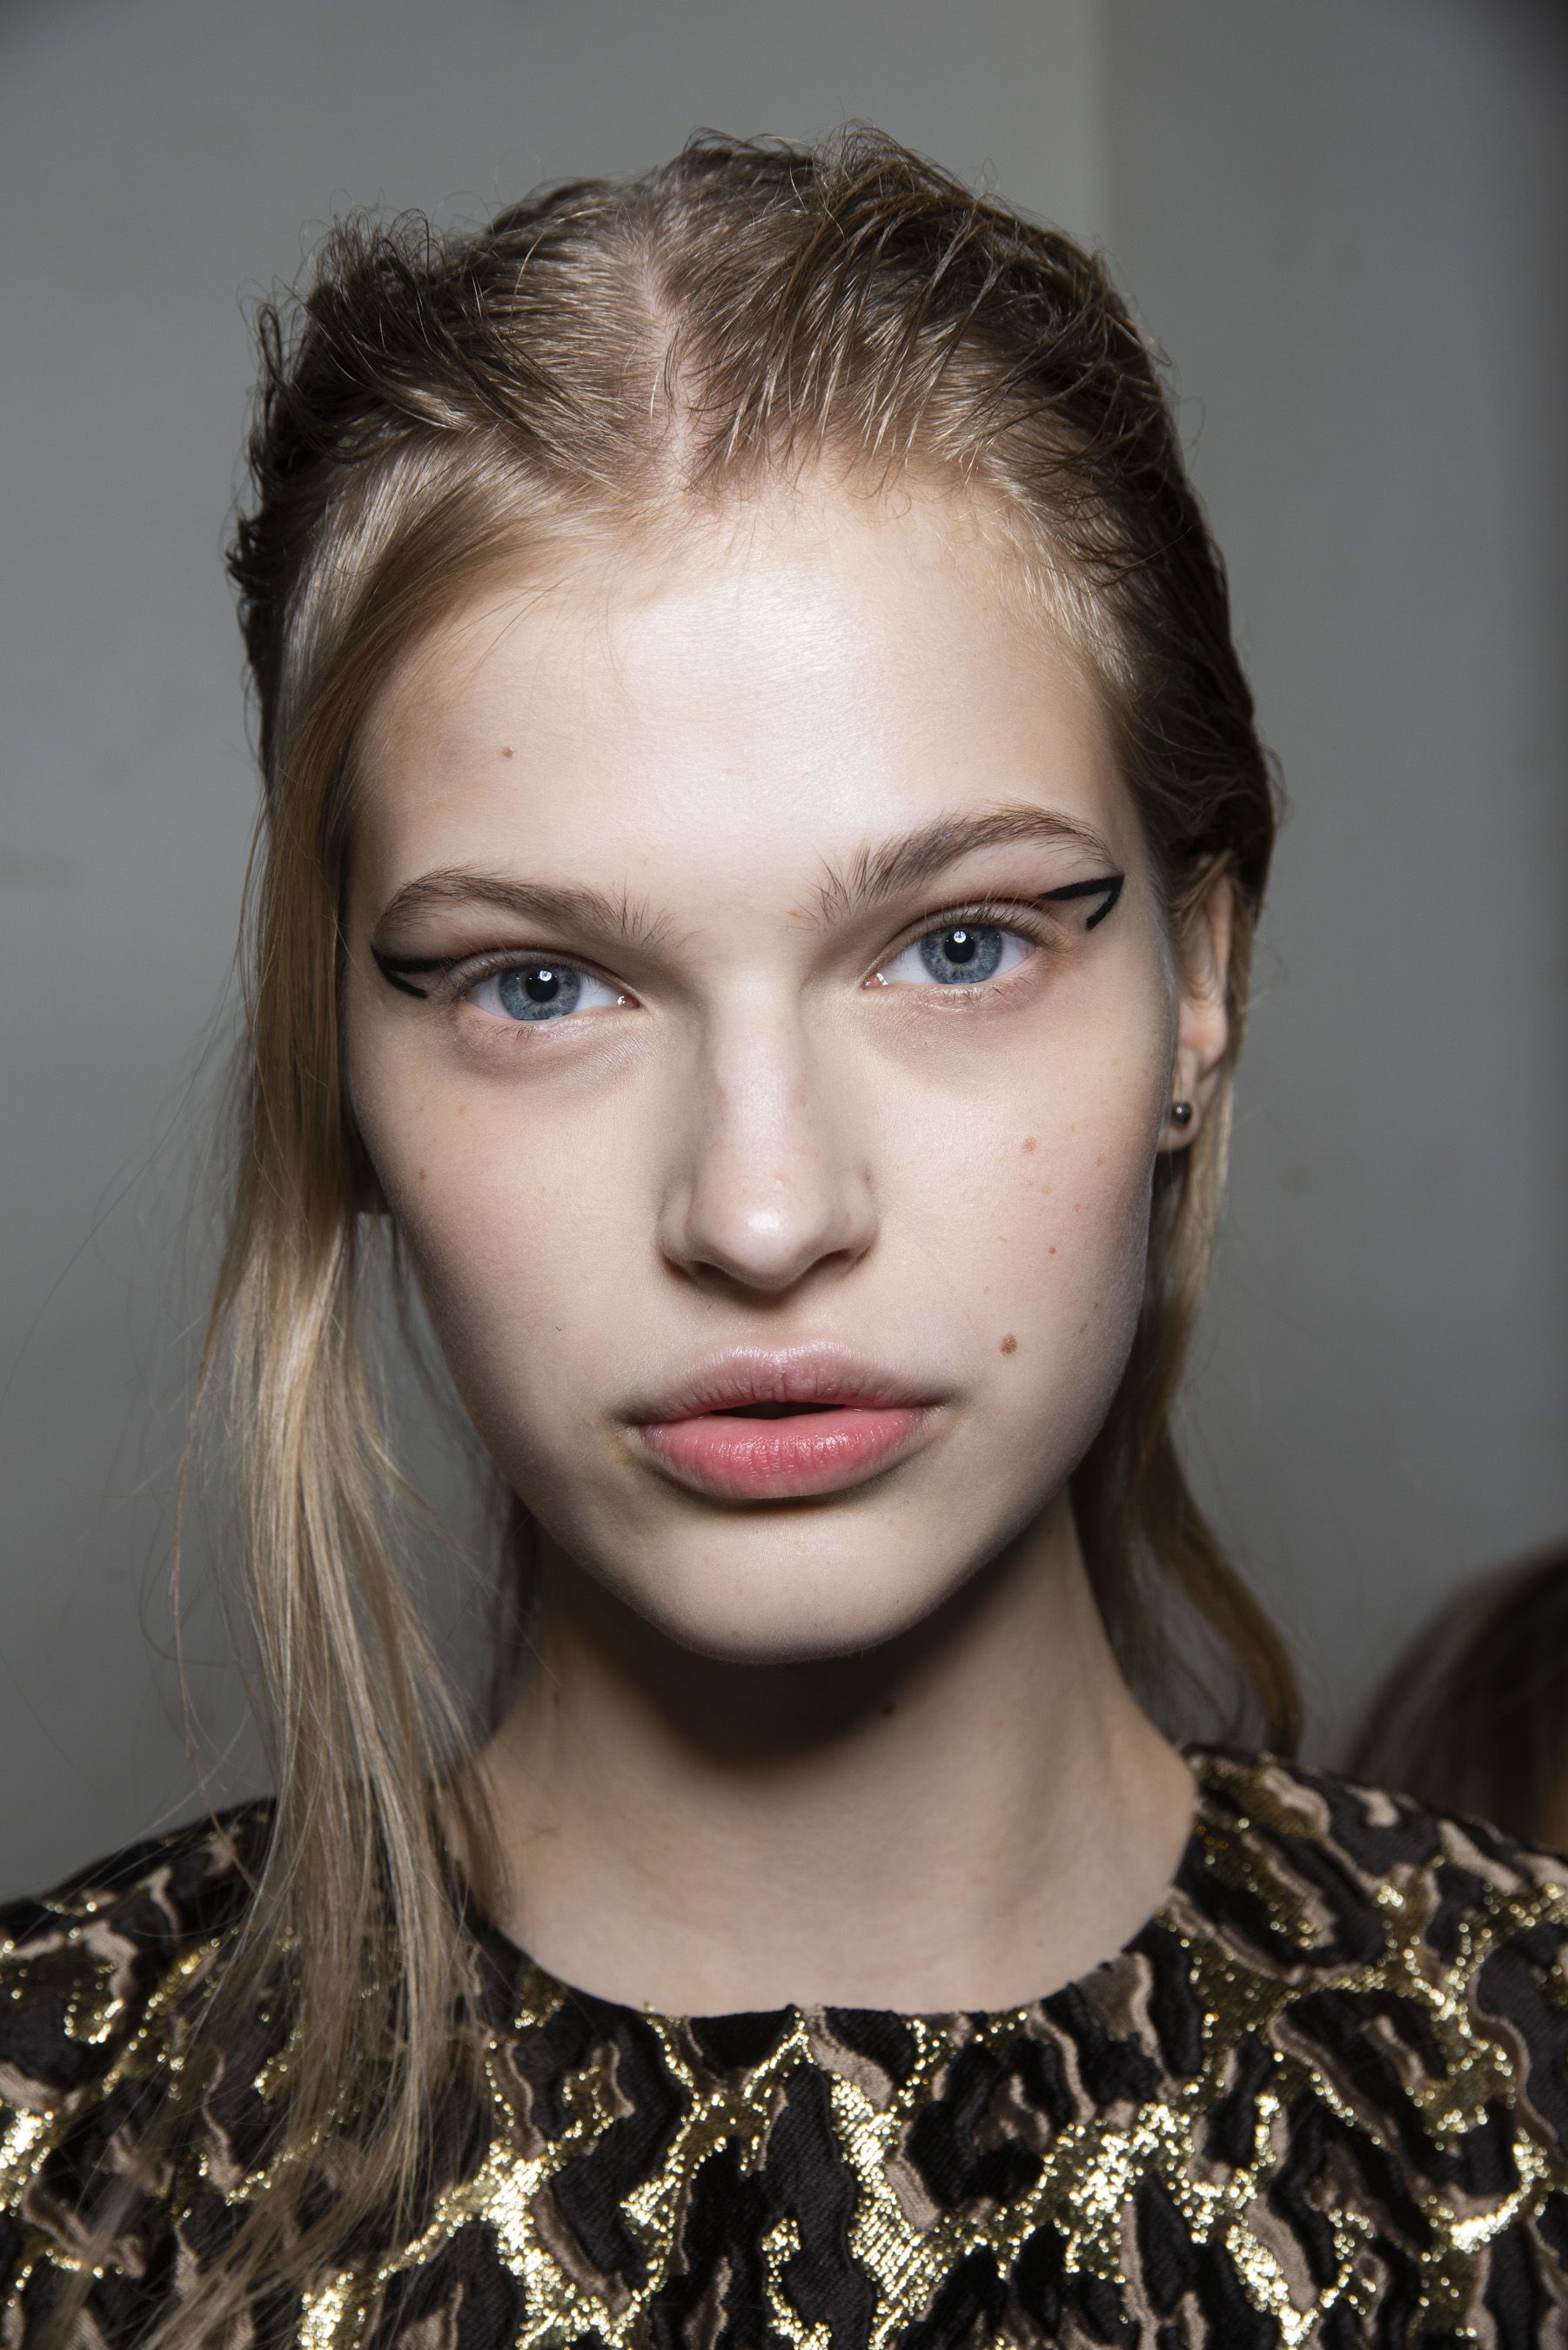 The Best Makeup Looks From Spring 2019 Runways - Beauty Looks Spring 2019